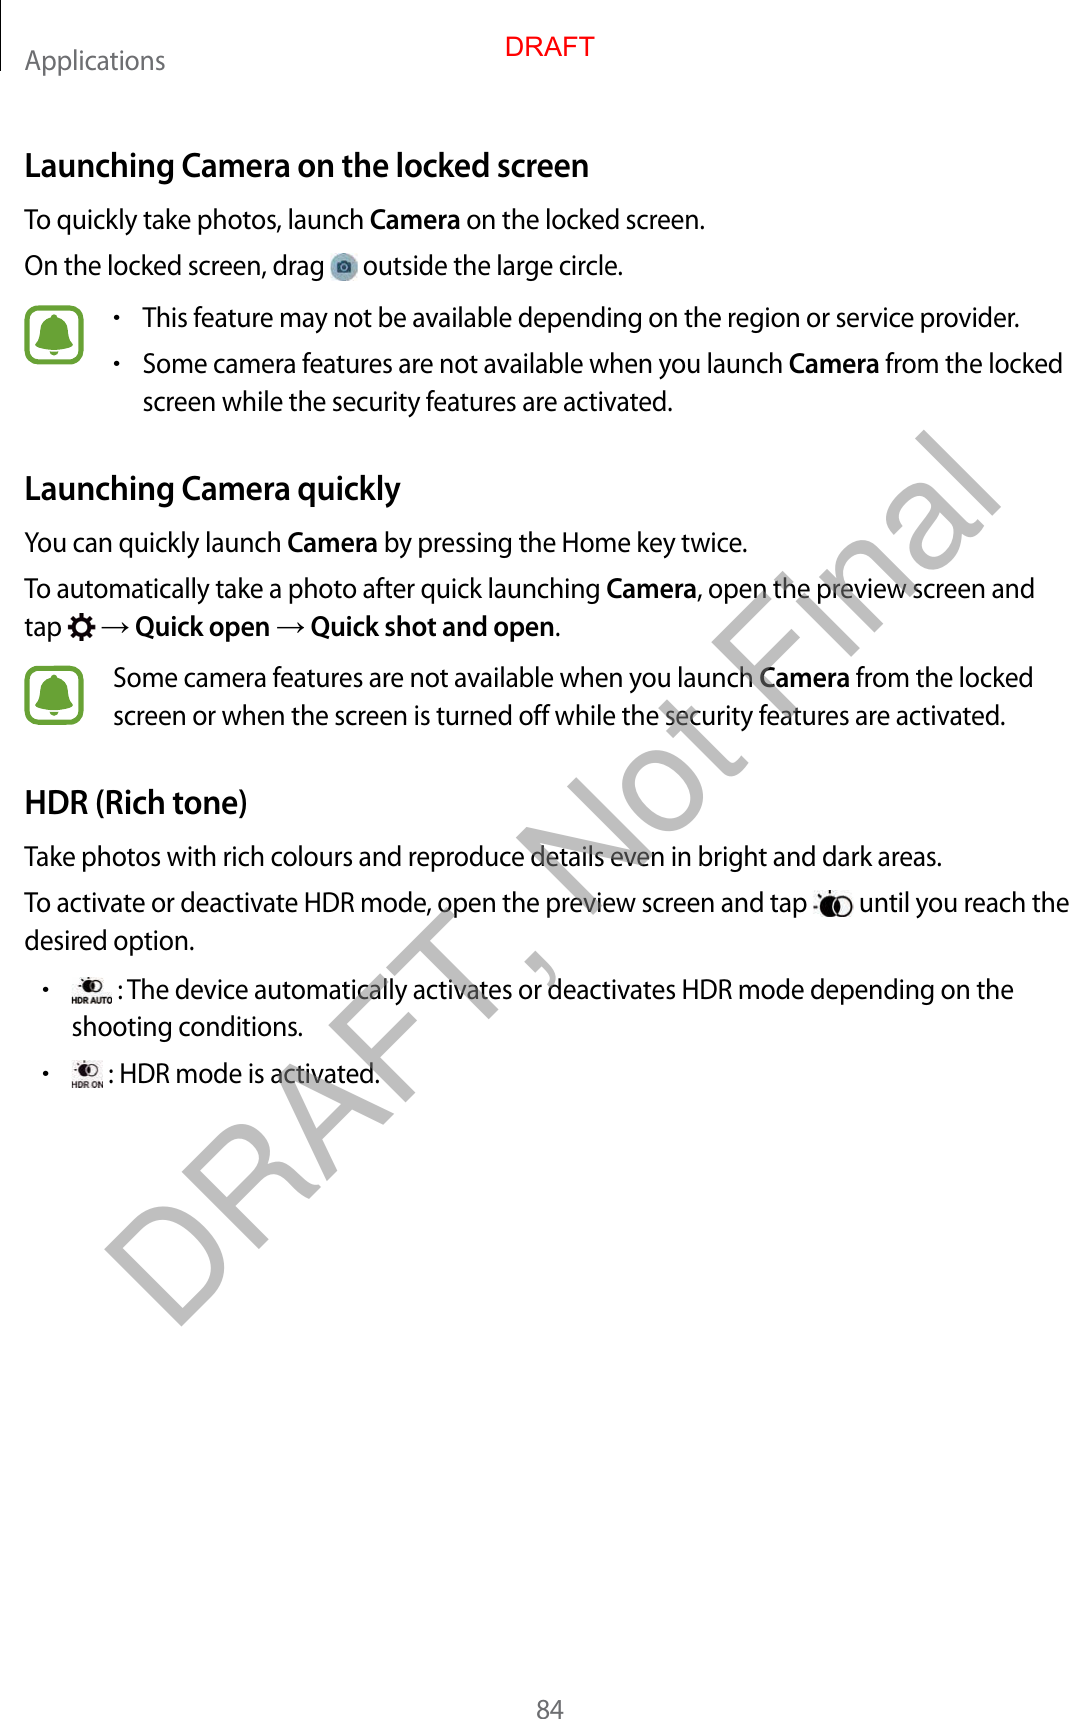 Applications84Launching Camera on the locked screenTo quickly take photos, launch Camera on the locked screen.On the locked screen, drag   outside the large circle.•This feature may not be available depending on the region or service provider.•Some camera features are not available when you launch Camera from the locked screen while the security features are activated.Launching Camera quicklyYou can quickly launch Camera by pressing the Home key twice.To automatically take a photo after quick launching Camera, open the preview screen and tap    Quick open  Quick shot and open.Some camera features are not available when you launch Camera from the locked screen or when the screen is turned off while the security features are activated.HDR (Rich tone)Take photos with rich colours and reproduce details even in bright and dark areas.To activate or deactivate HDR mode, open the preview screen and tap   until you reach the desired option.• : The device automatically activates or deactivates HDR mode depending on the shooting conditions.• : HDR mode is activated.DRAFTDRAFT, Not Final